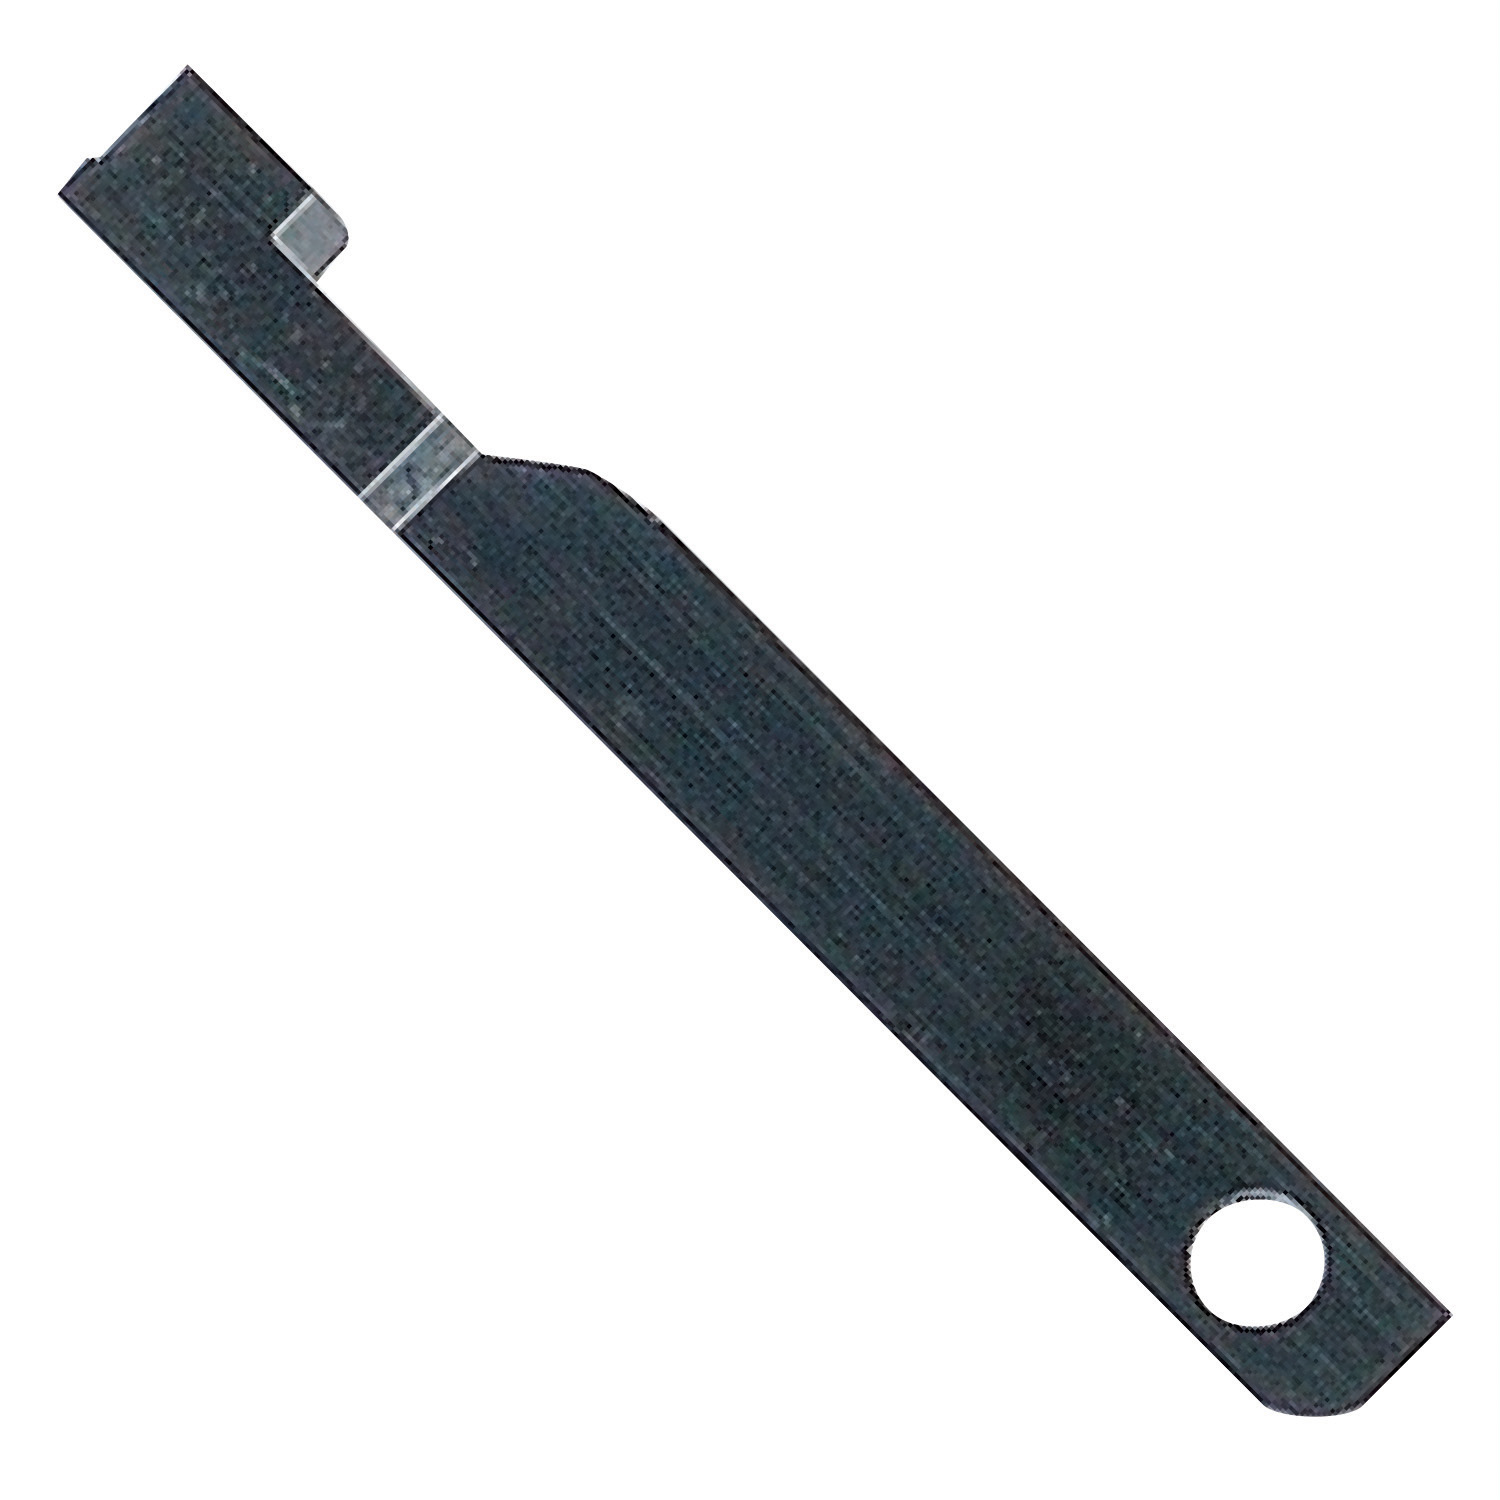 Replacement Blade For Nibbling Tool TZ-21 TZ-21